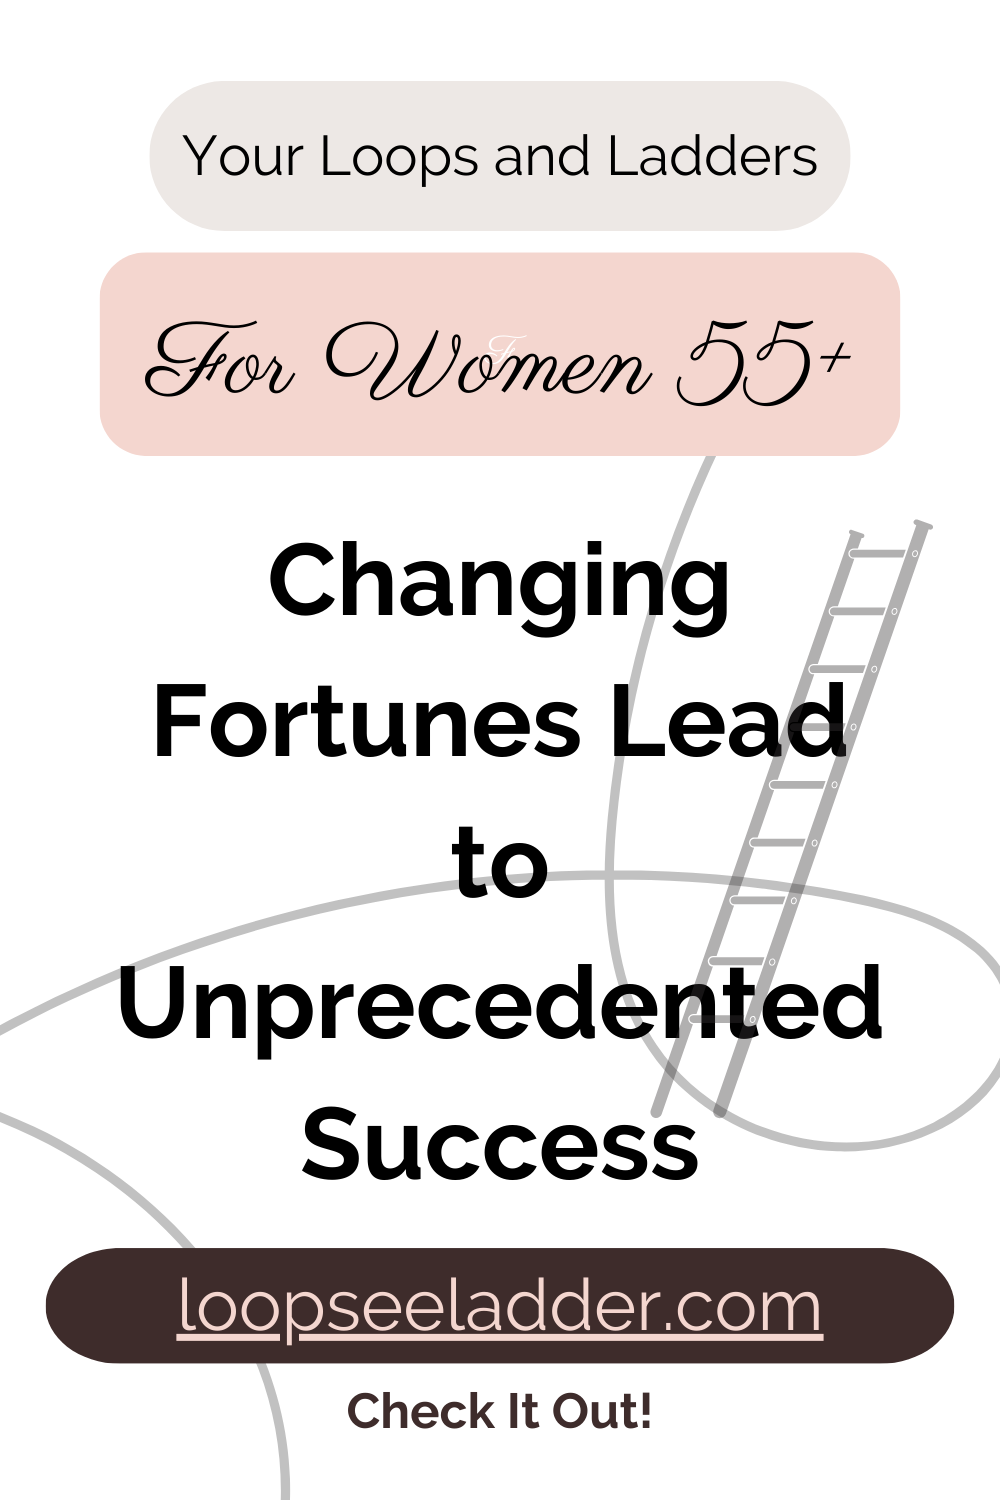 The Untold Stories of Women 55+: How Changing Fortunes Led to Unprecedented Success